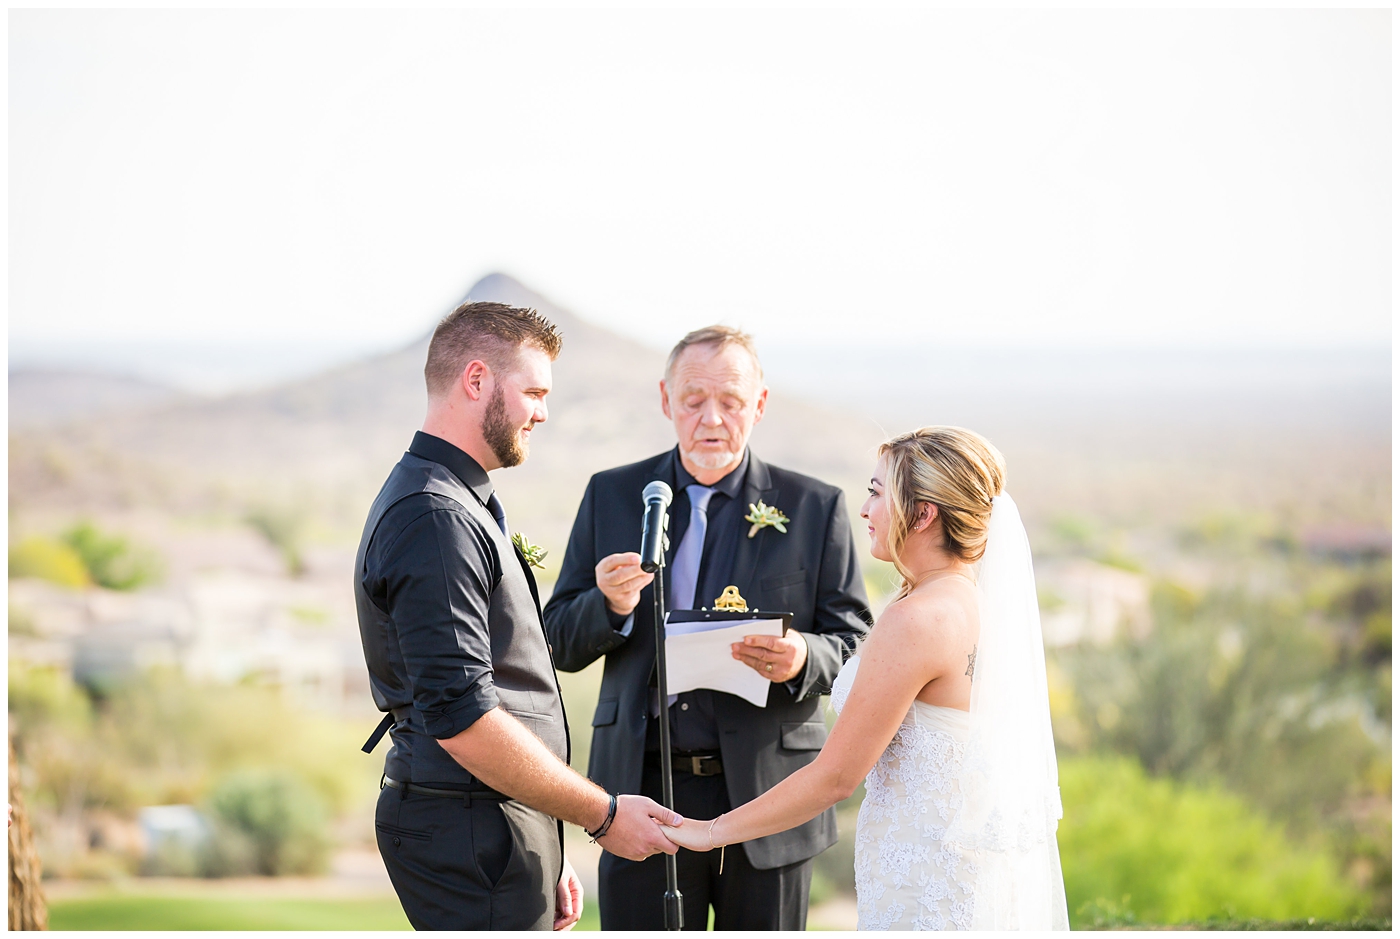 bride with fishtail braid and strapless dress with white rose and greenery bouquet with groom in black pants and vest and tie with rolled up shirt sleeves with succulent boutonniere during outdoor wedding ceremony